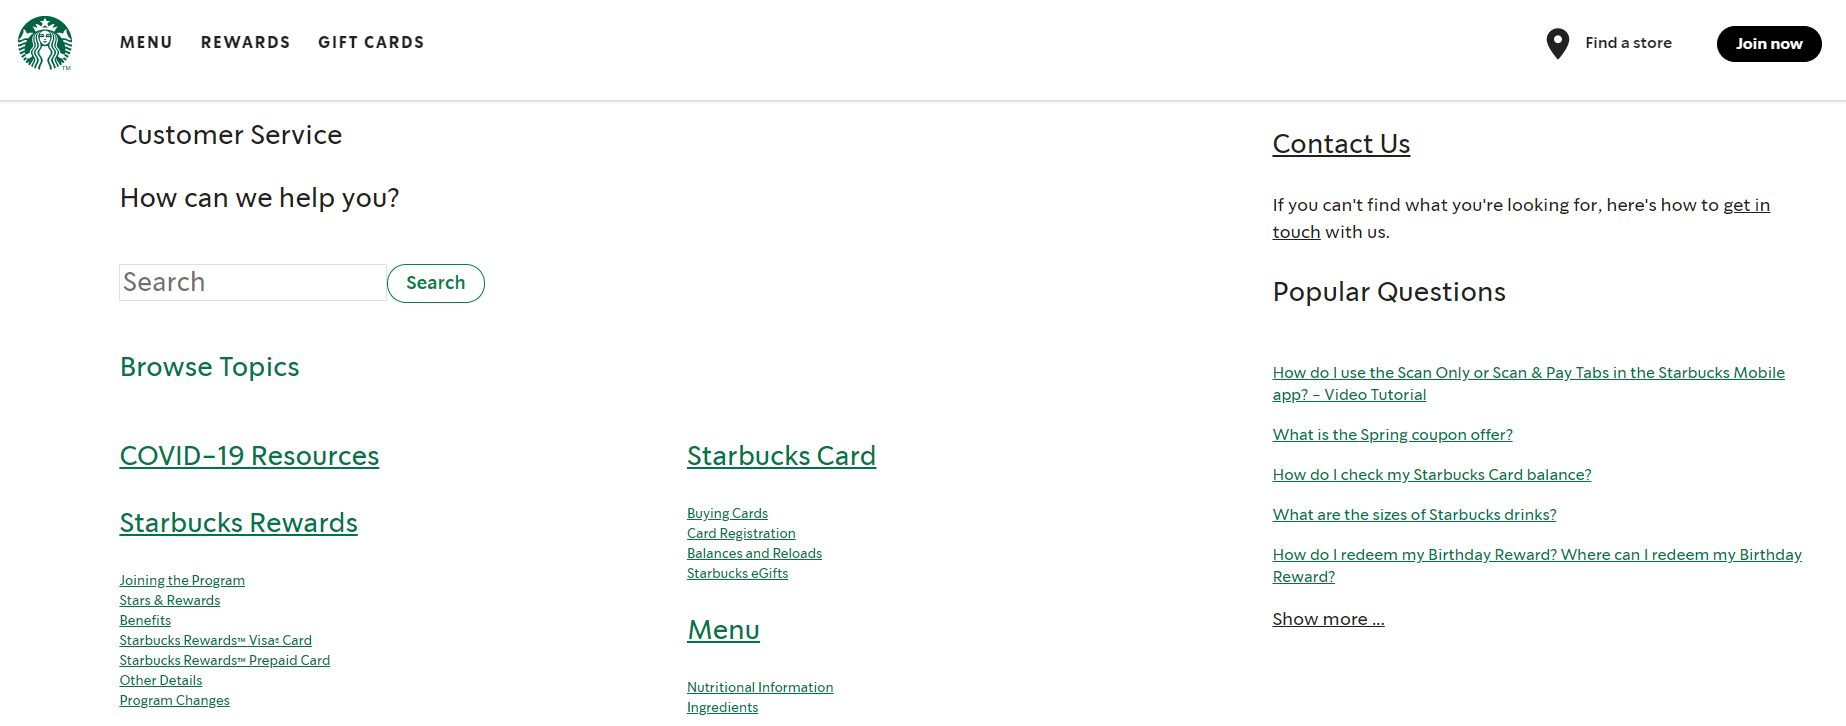 Starbucks’ well-crafted FAQ section